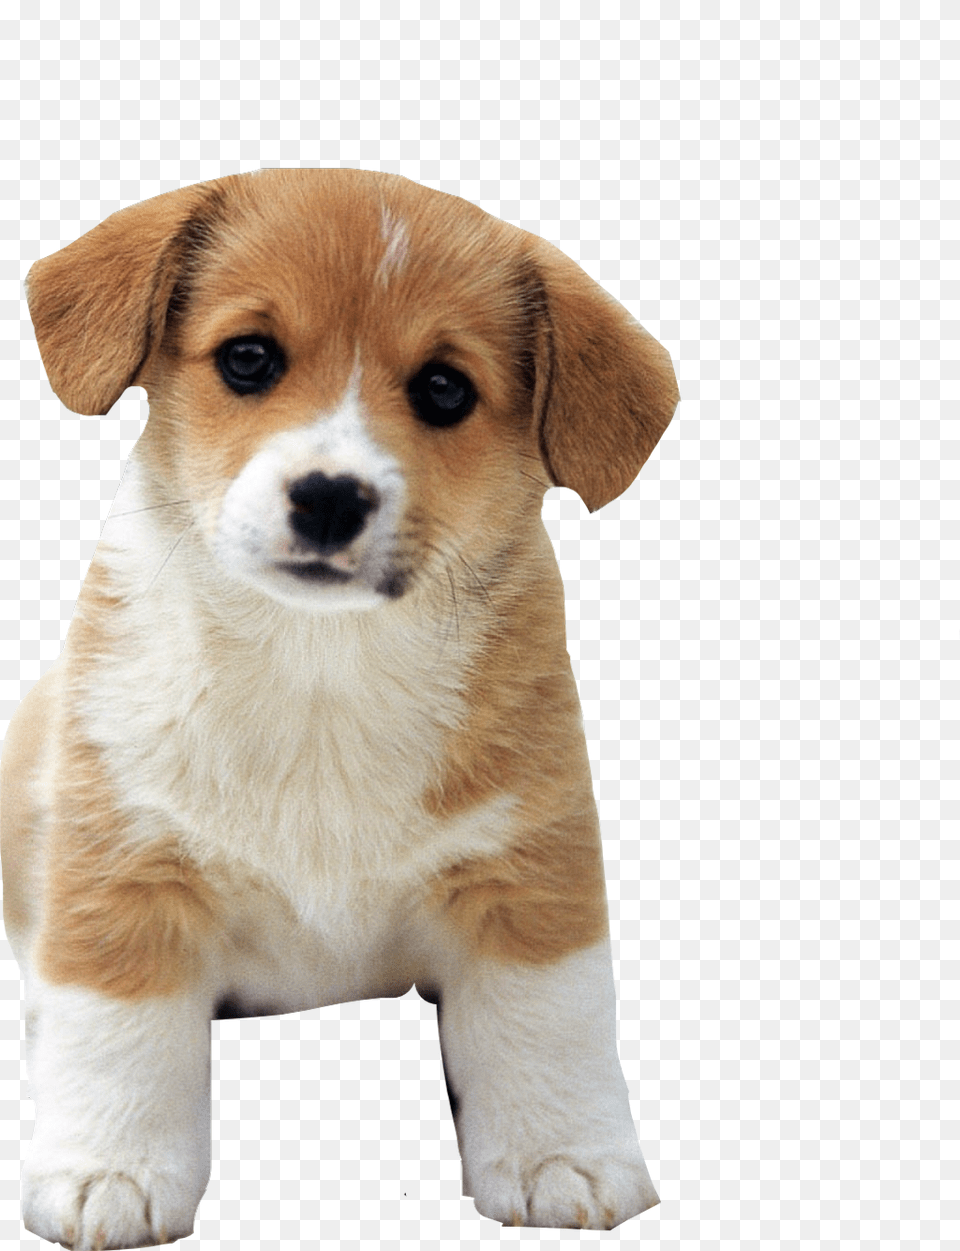 Cutest Dog Ever Cute Dog, Animal, Canine, Mammal, Pet Png Image